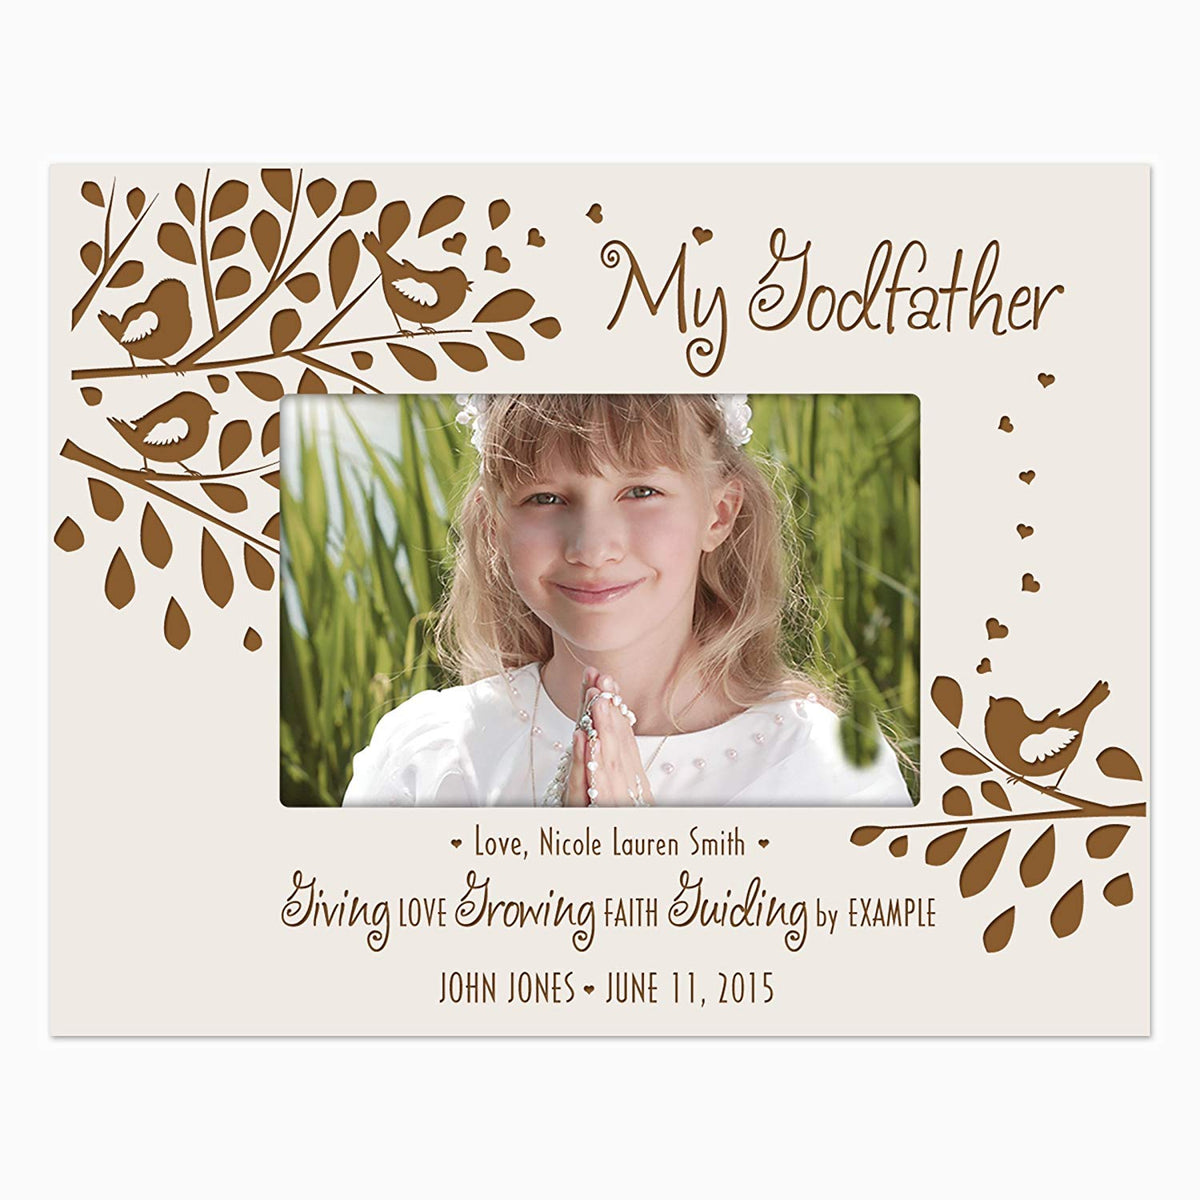 Personalized 4x6 Godparent Photo Frame Gift - Giving Growing Guiding - LifeSong Milestones